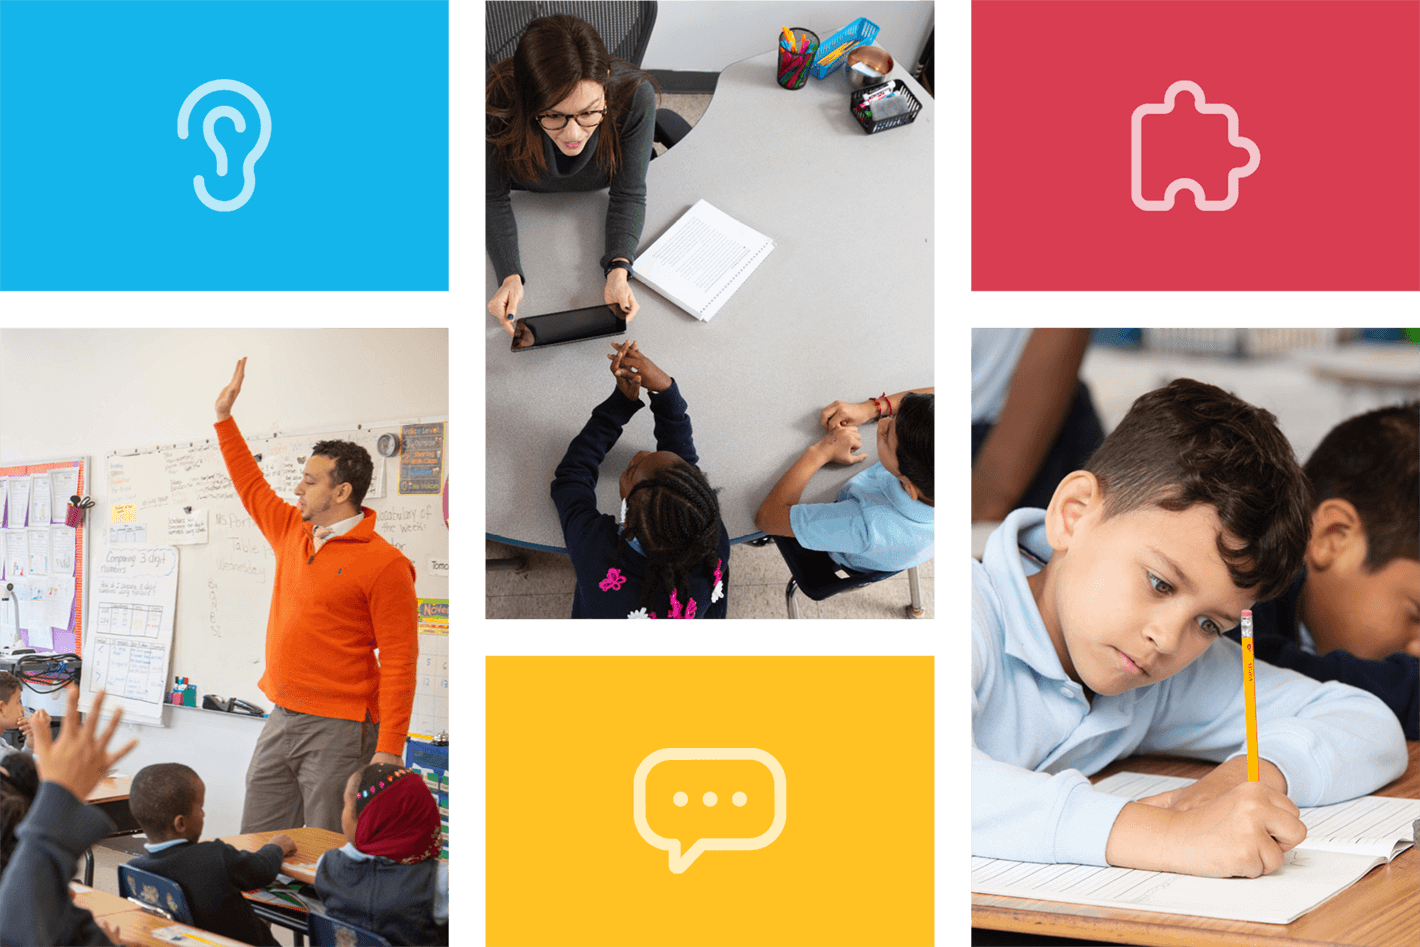 Collage of educational scenes including a teacher in a classroom, students engaging in activities, and icons representing digital learning tools.